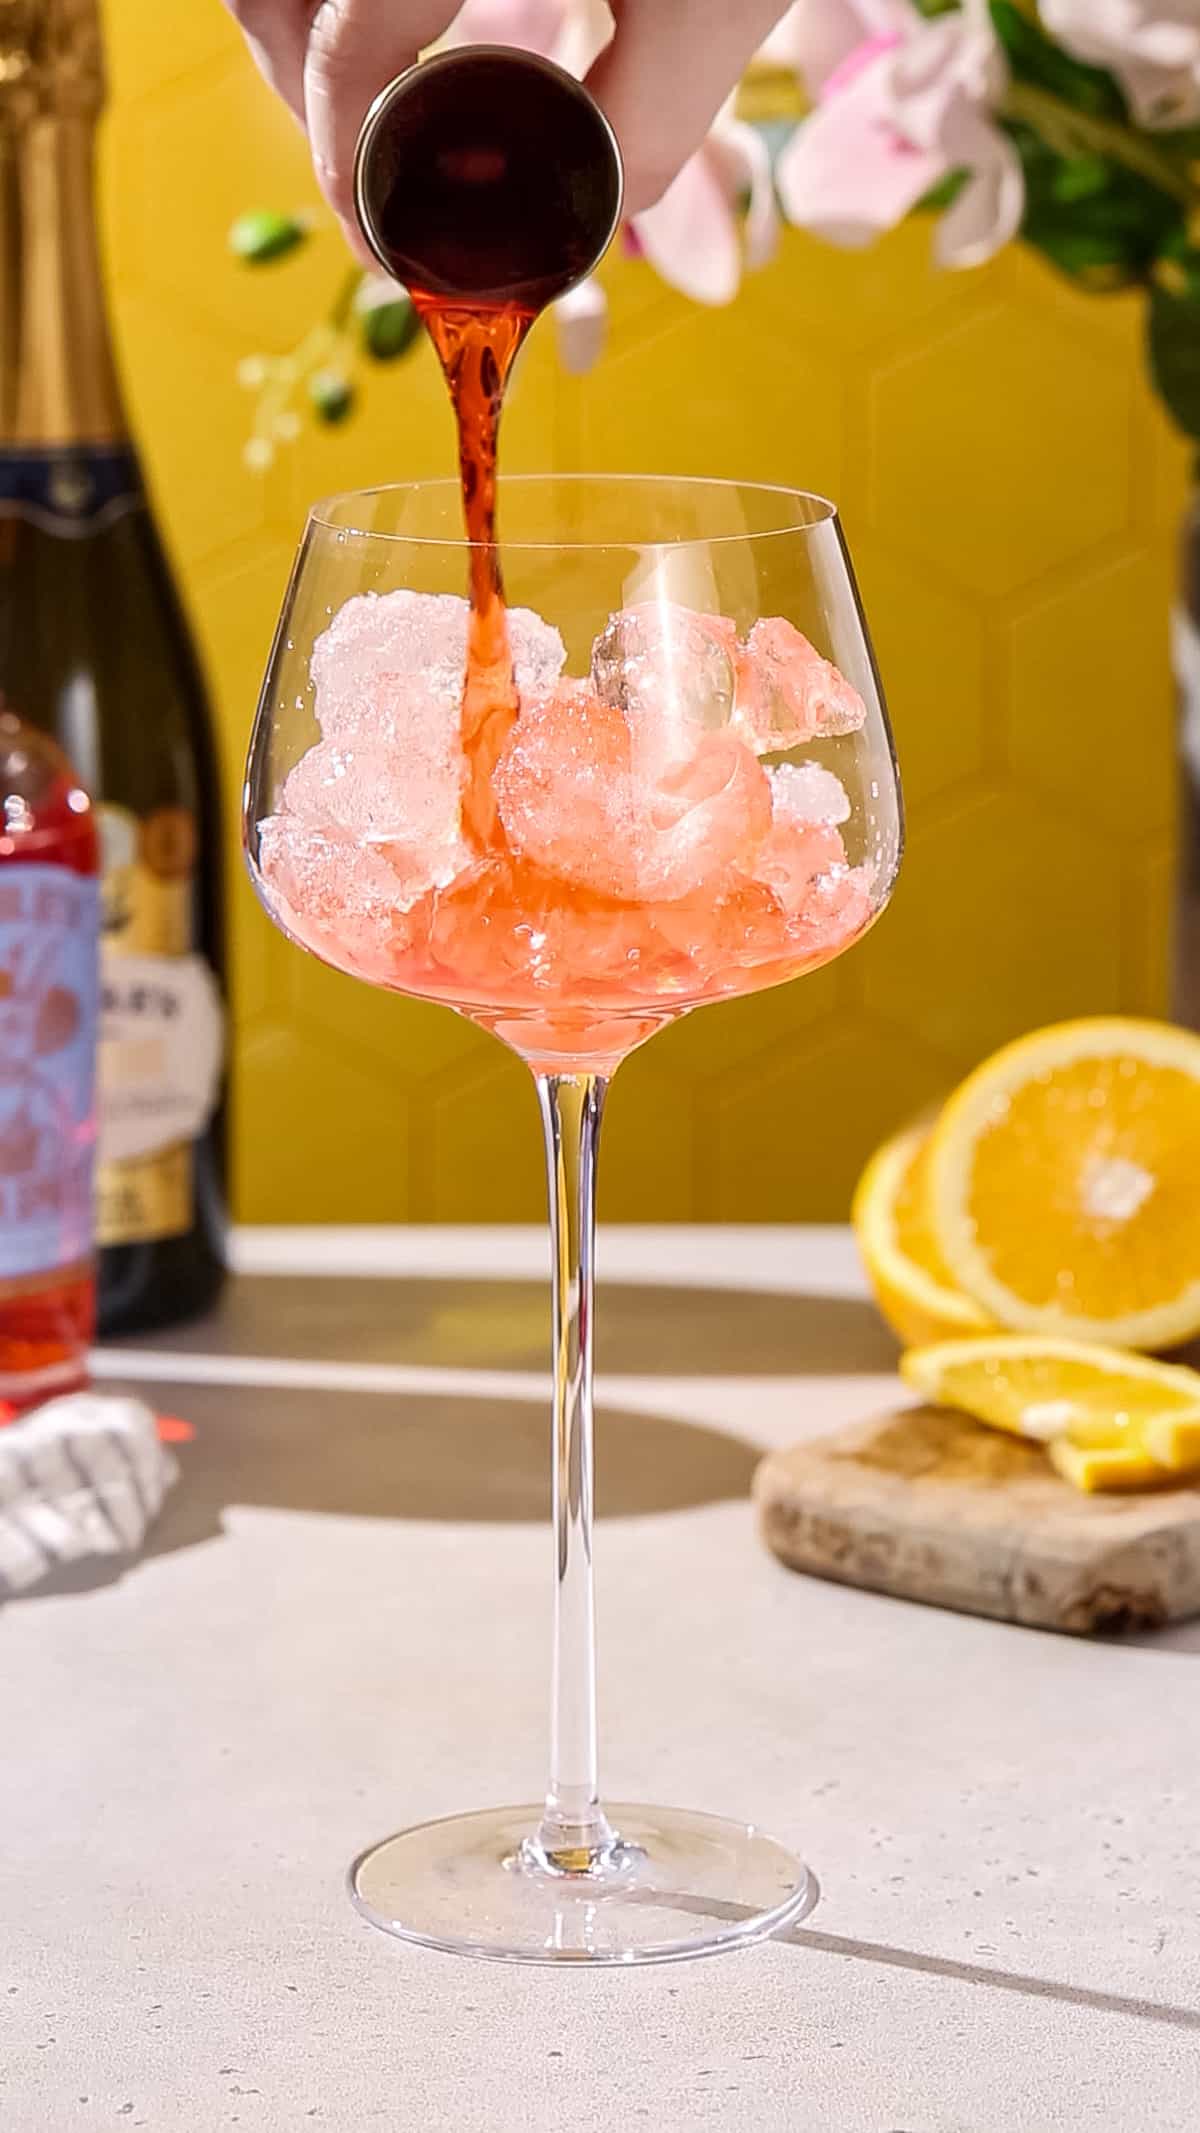 Hand pouring non-alcoholic aperitif into a spritz glass filled with ice.